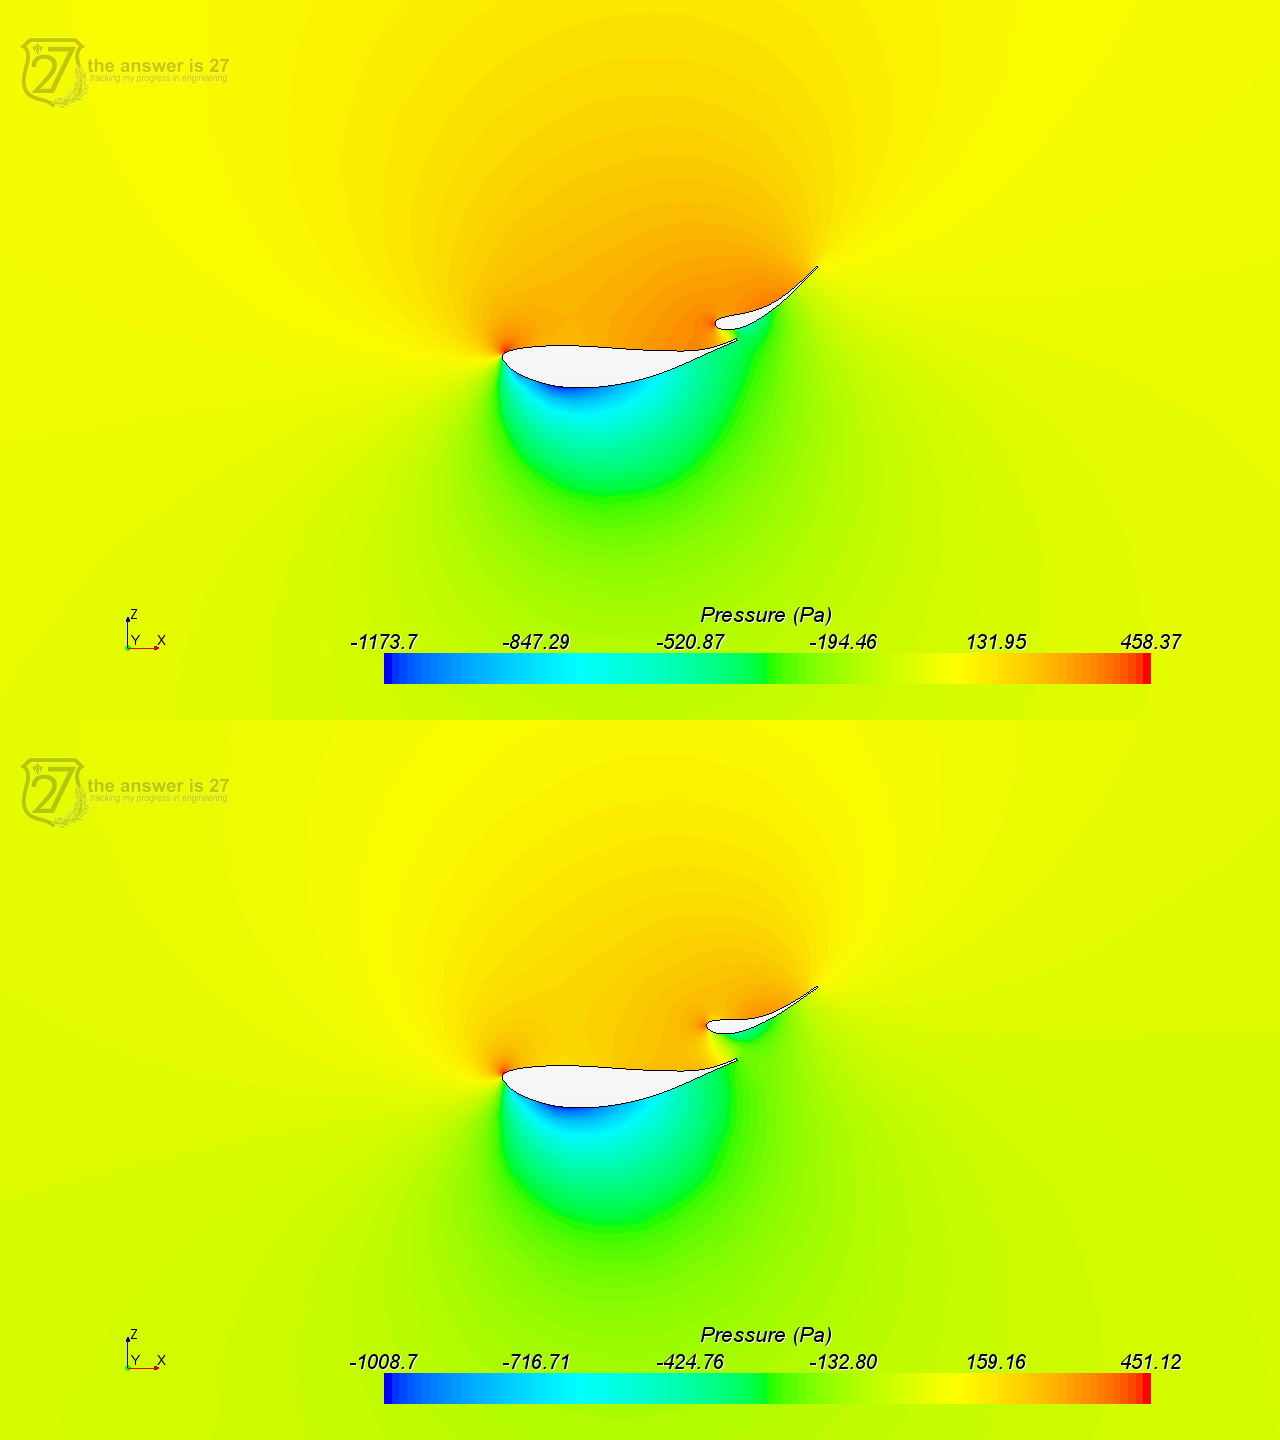 Figure 2. Contours of Pressure at DRS OFF (above) and at flap pivoted 10 degrees (DRS ON, below)